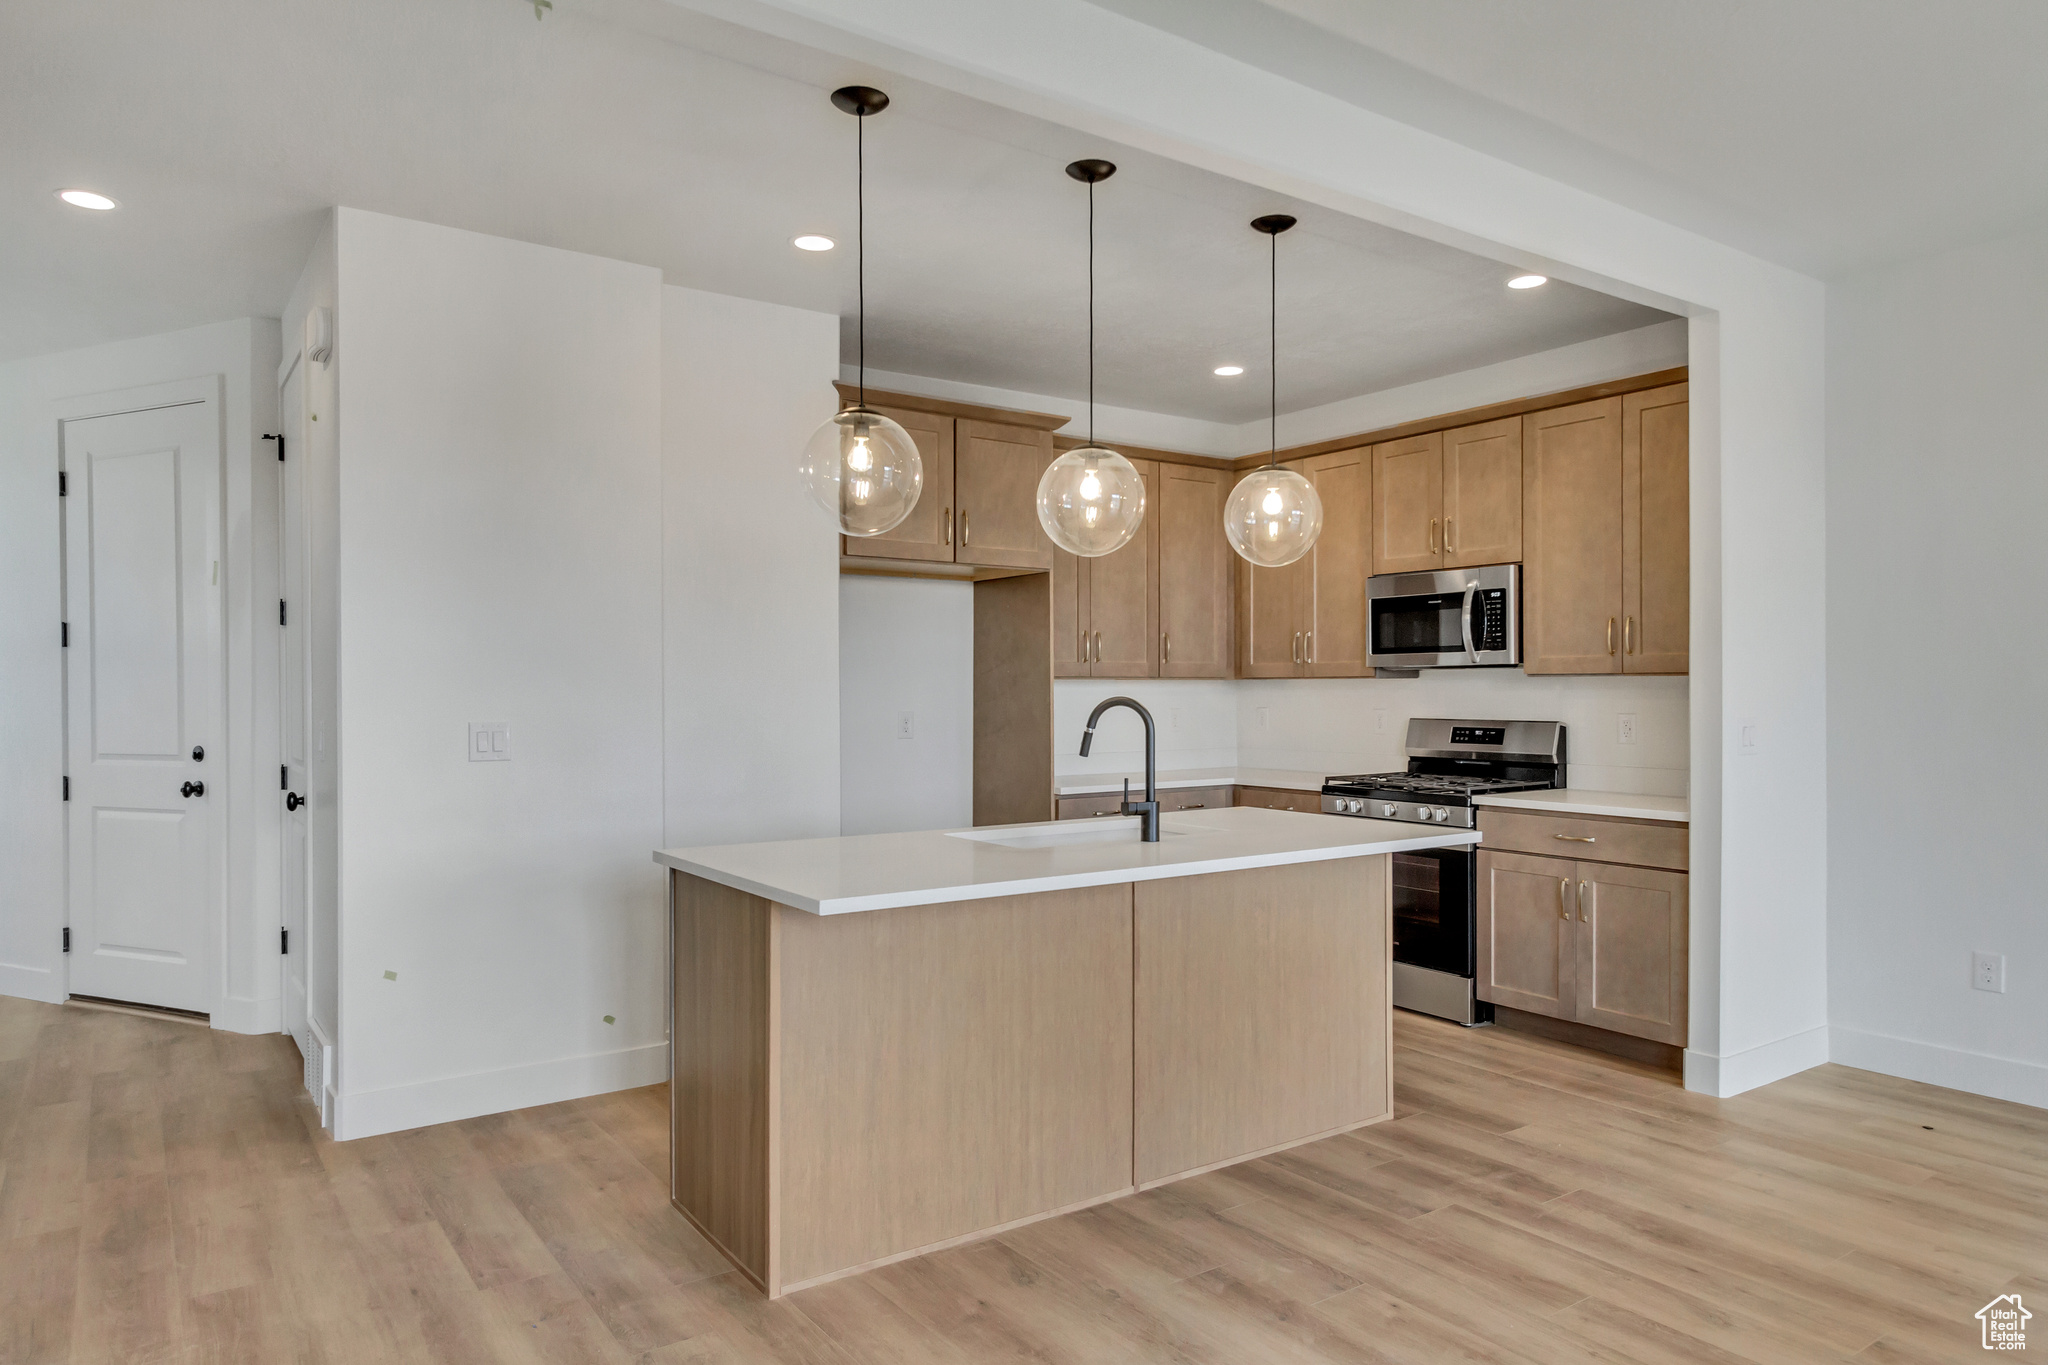 Kitchen with decorative light fixtures, appliances with stainless steel finishes, an island with sink, and light wood-type flooring